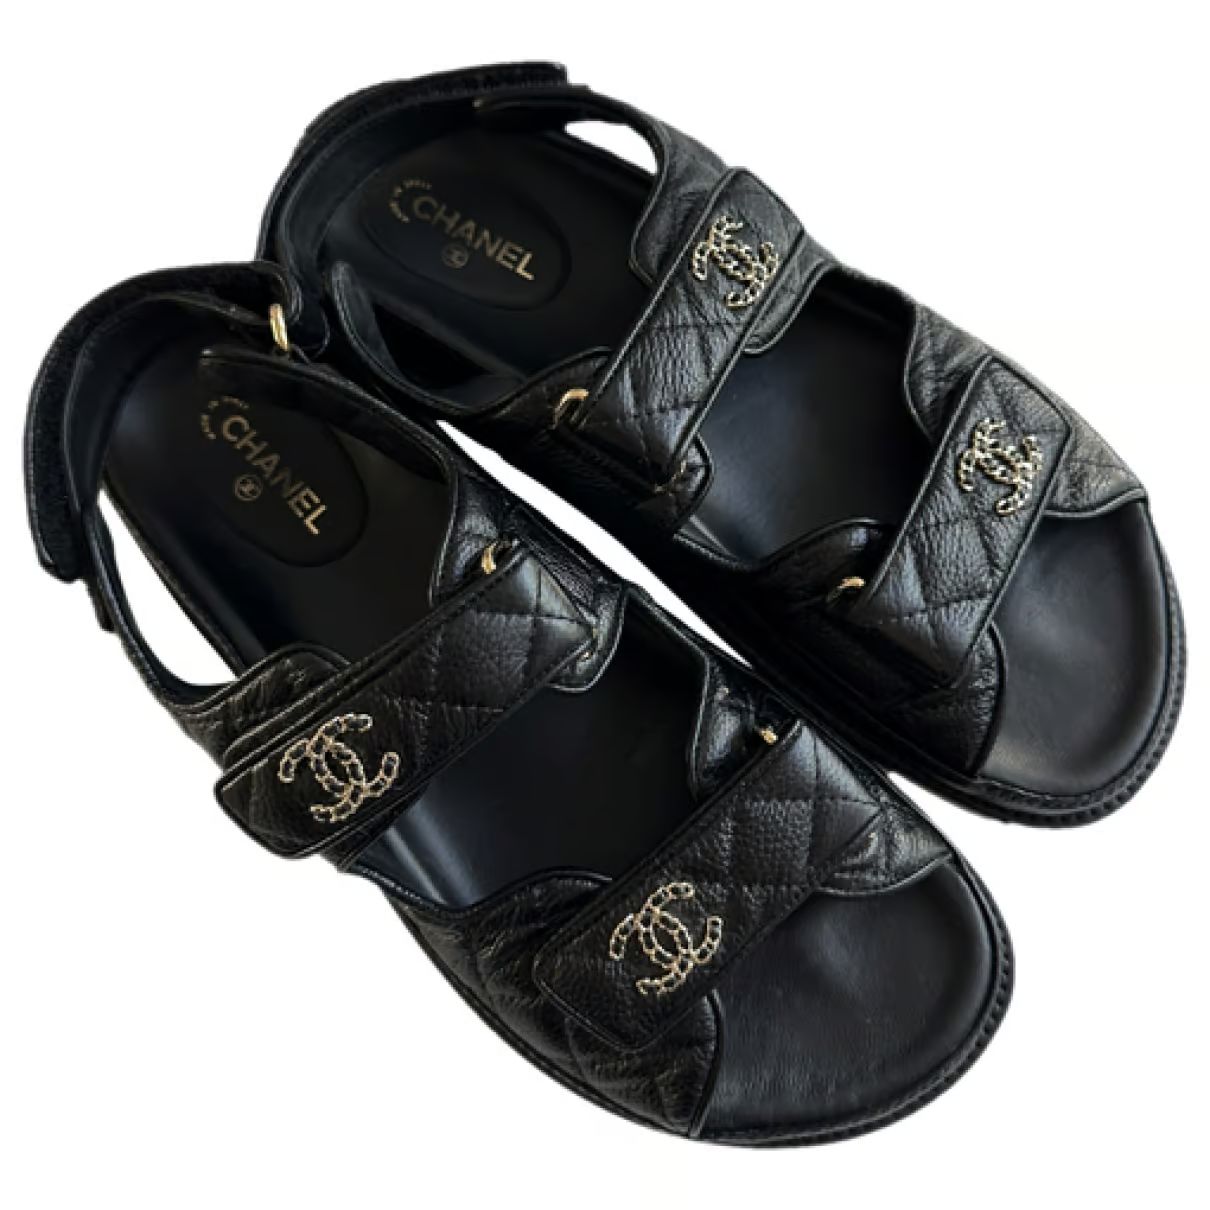 Dad sandals leather sandal Chanel Black size 39.5 EU in Leather - 36503550 | Vestiaire Collective (Global)